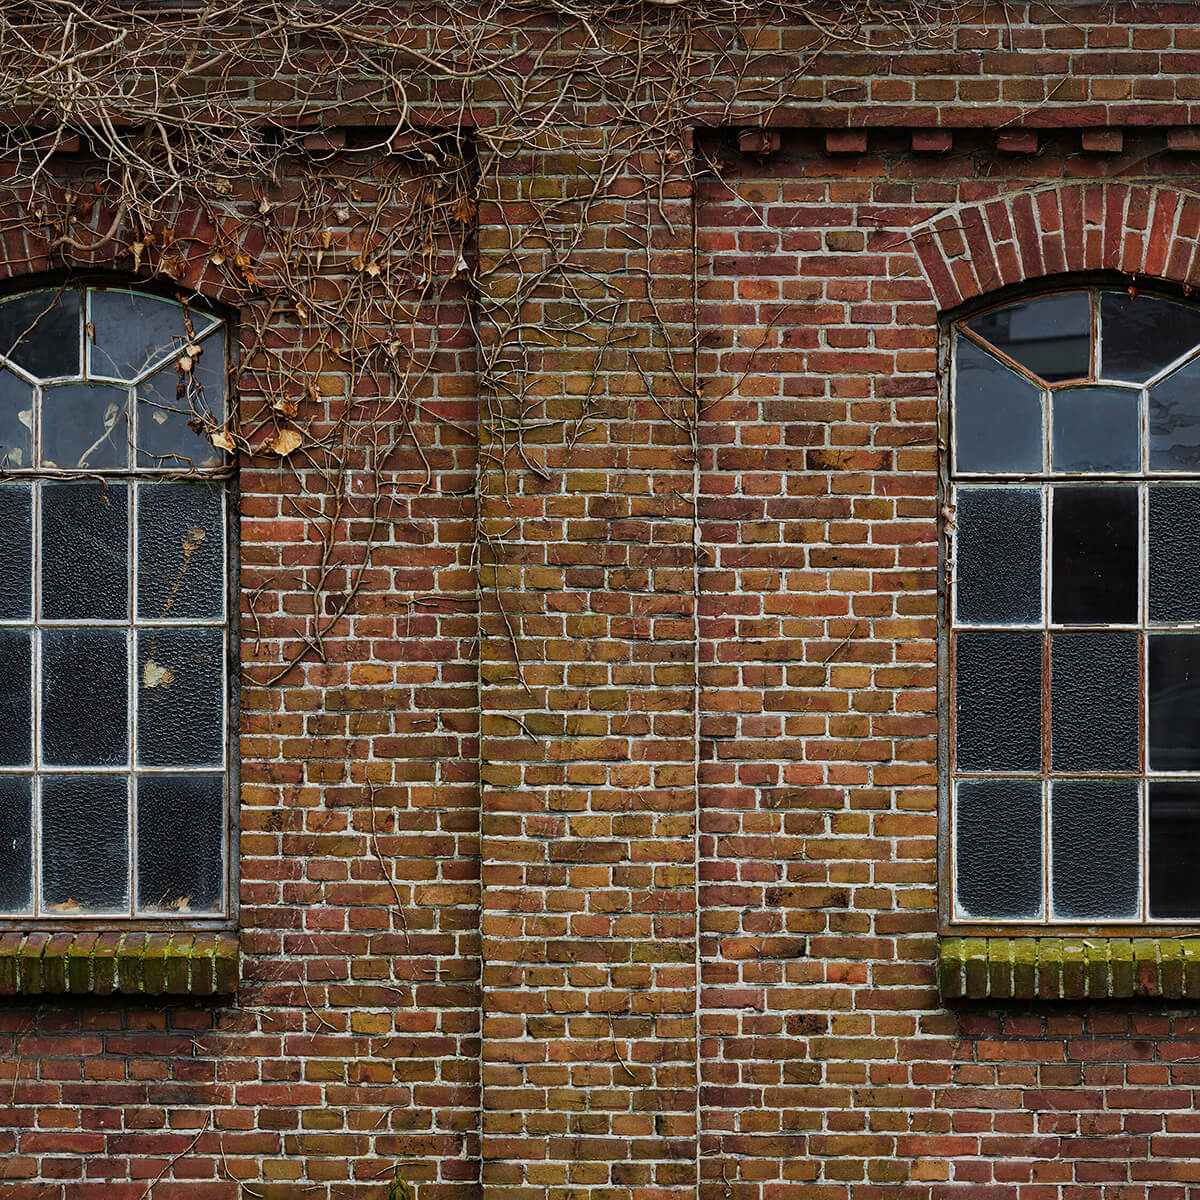 Windows in old factory building